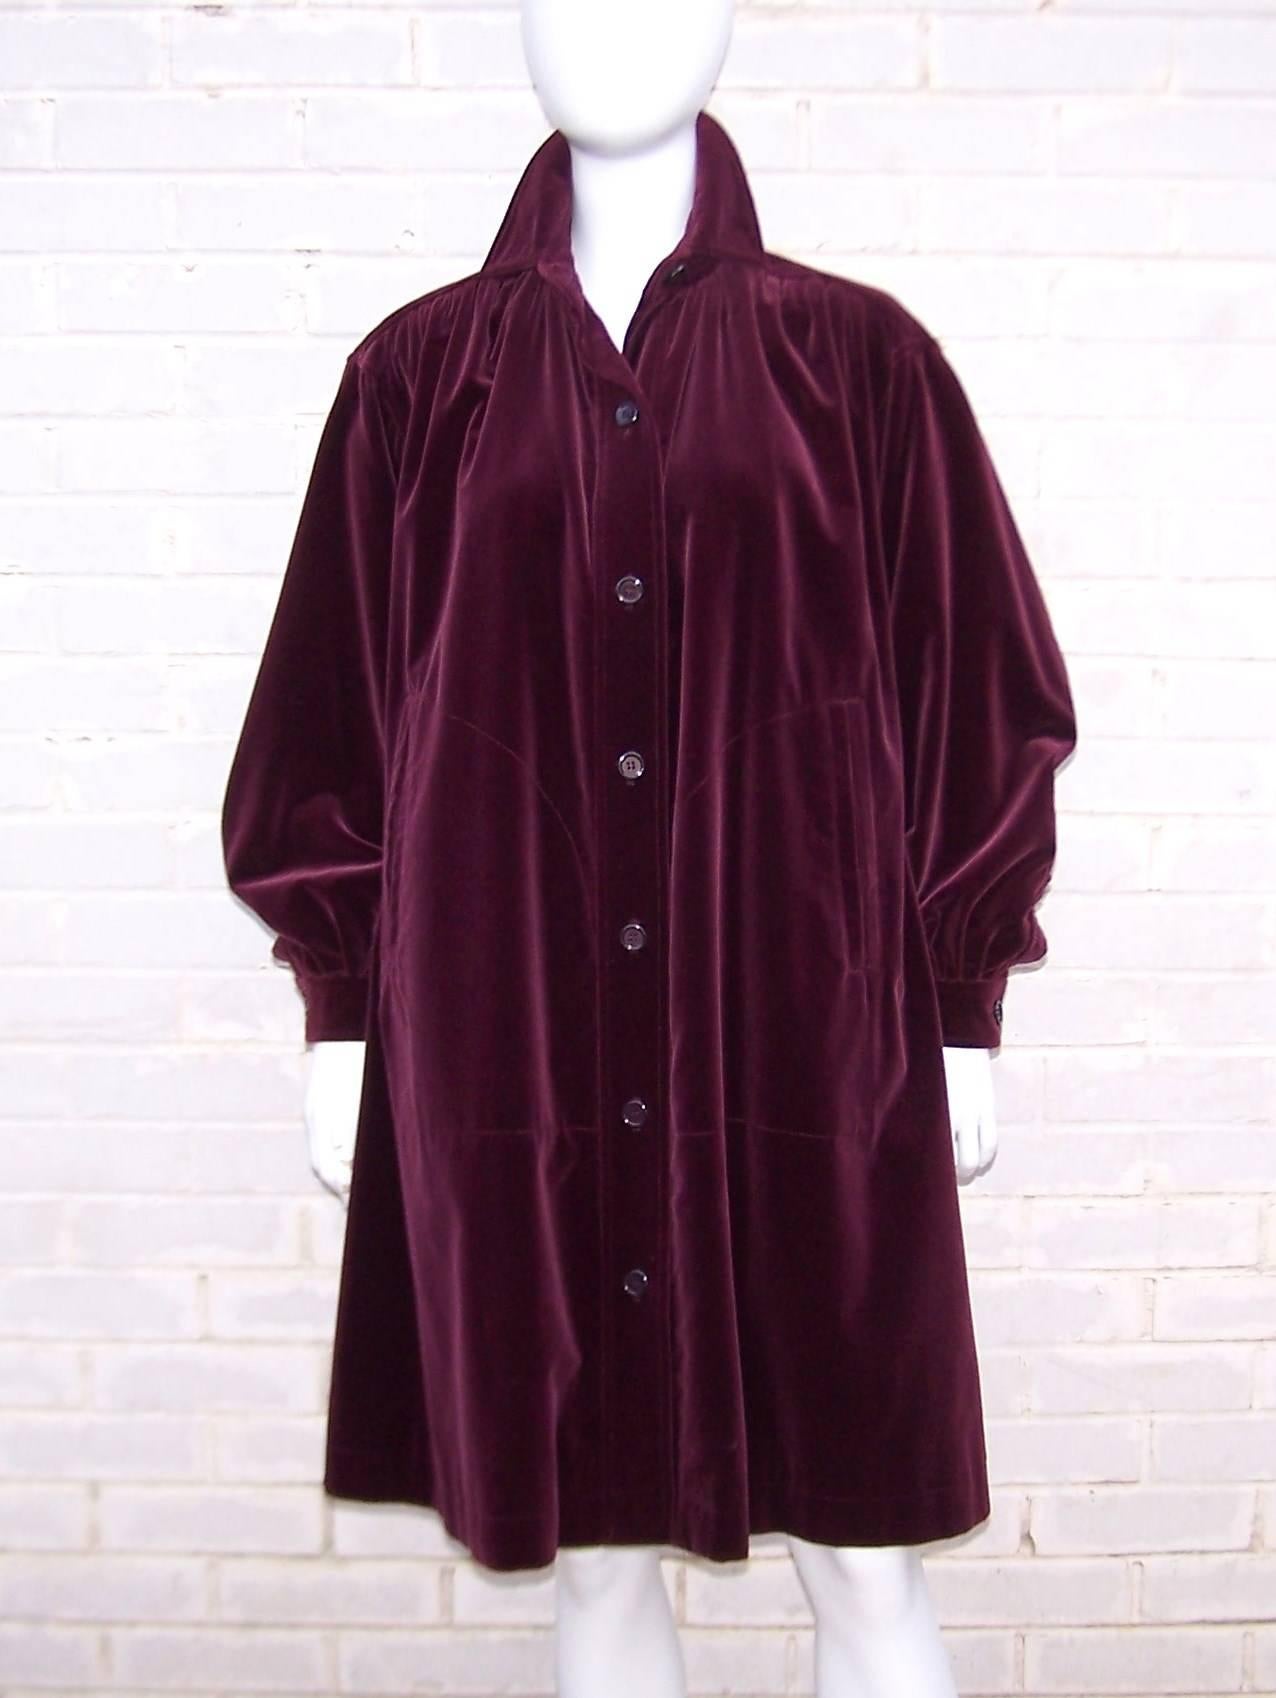 Lush...to the touch...to the eyes...every sensory perception is stimulated by this gorgeous Yves Saint Laurent coat!  The design starts with a rich ruby red heavy weight velvet fabric and moves onto a smock style construction with definition at the